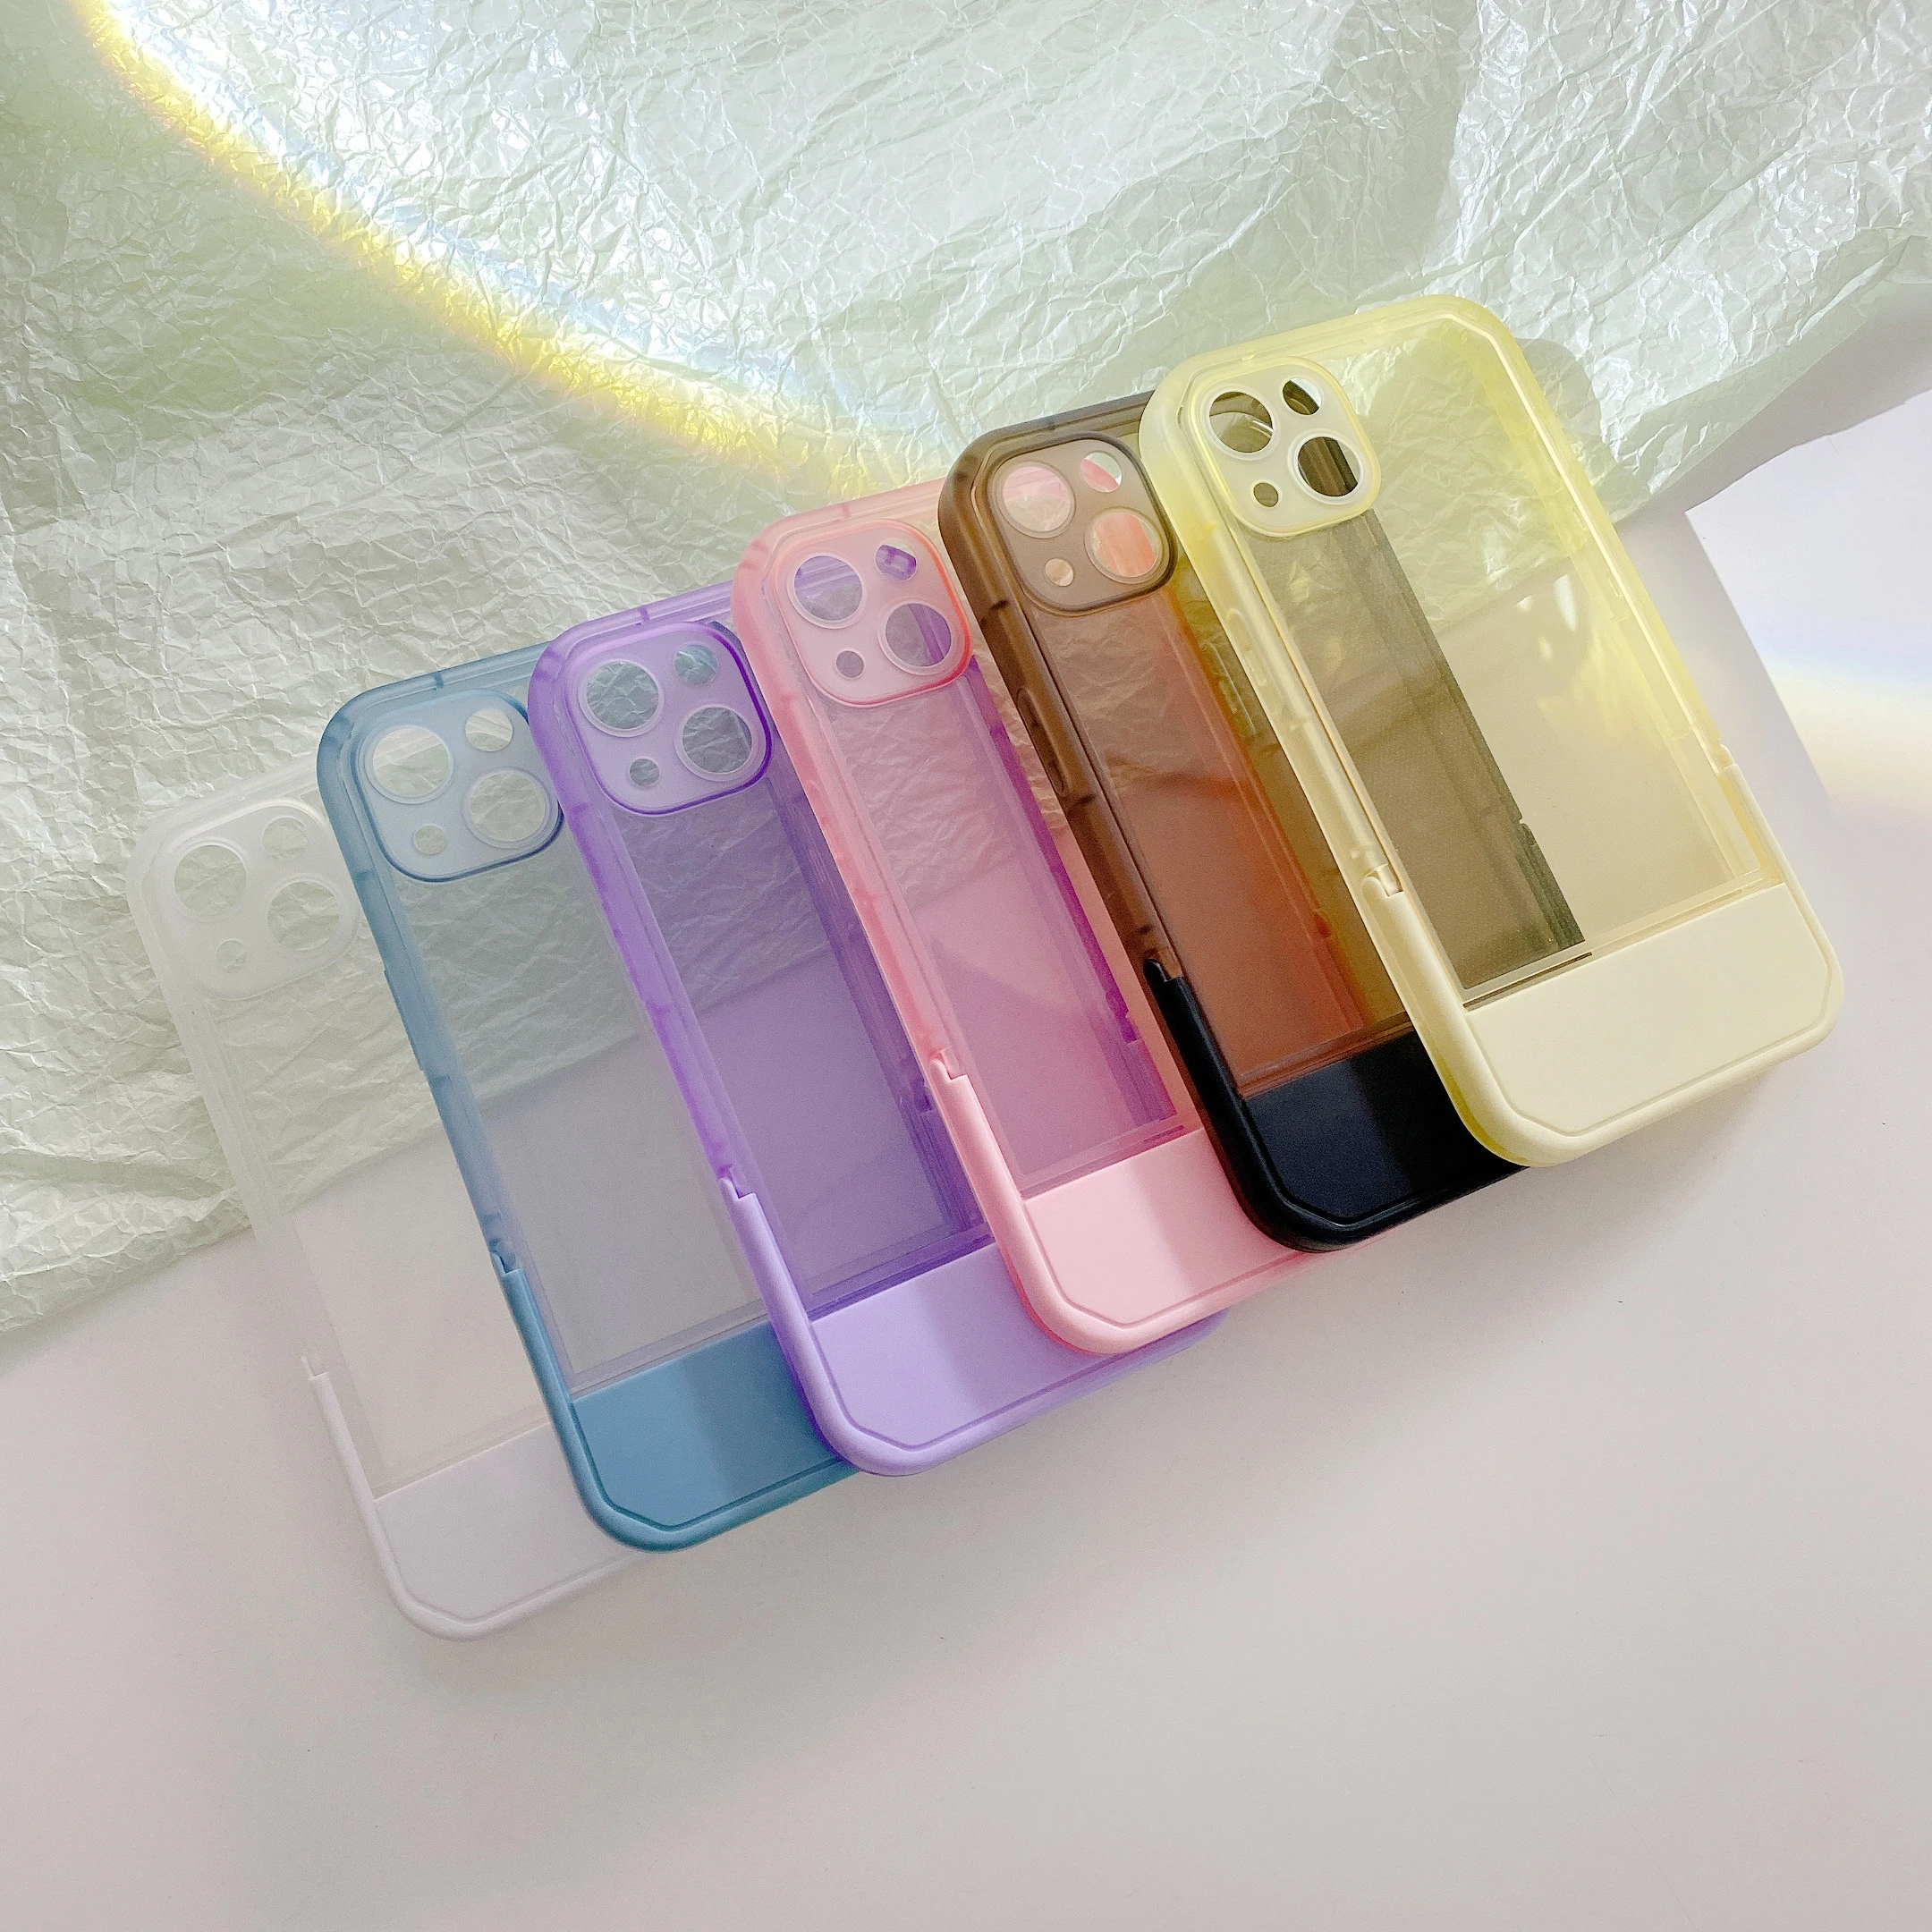 Solid Chair Holder Stand Transparent Silicone Case For iPhone 13 12 Pro Max Clear Soft Bumper Cover iPhone 11 7 8 Plus X XS X